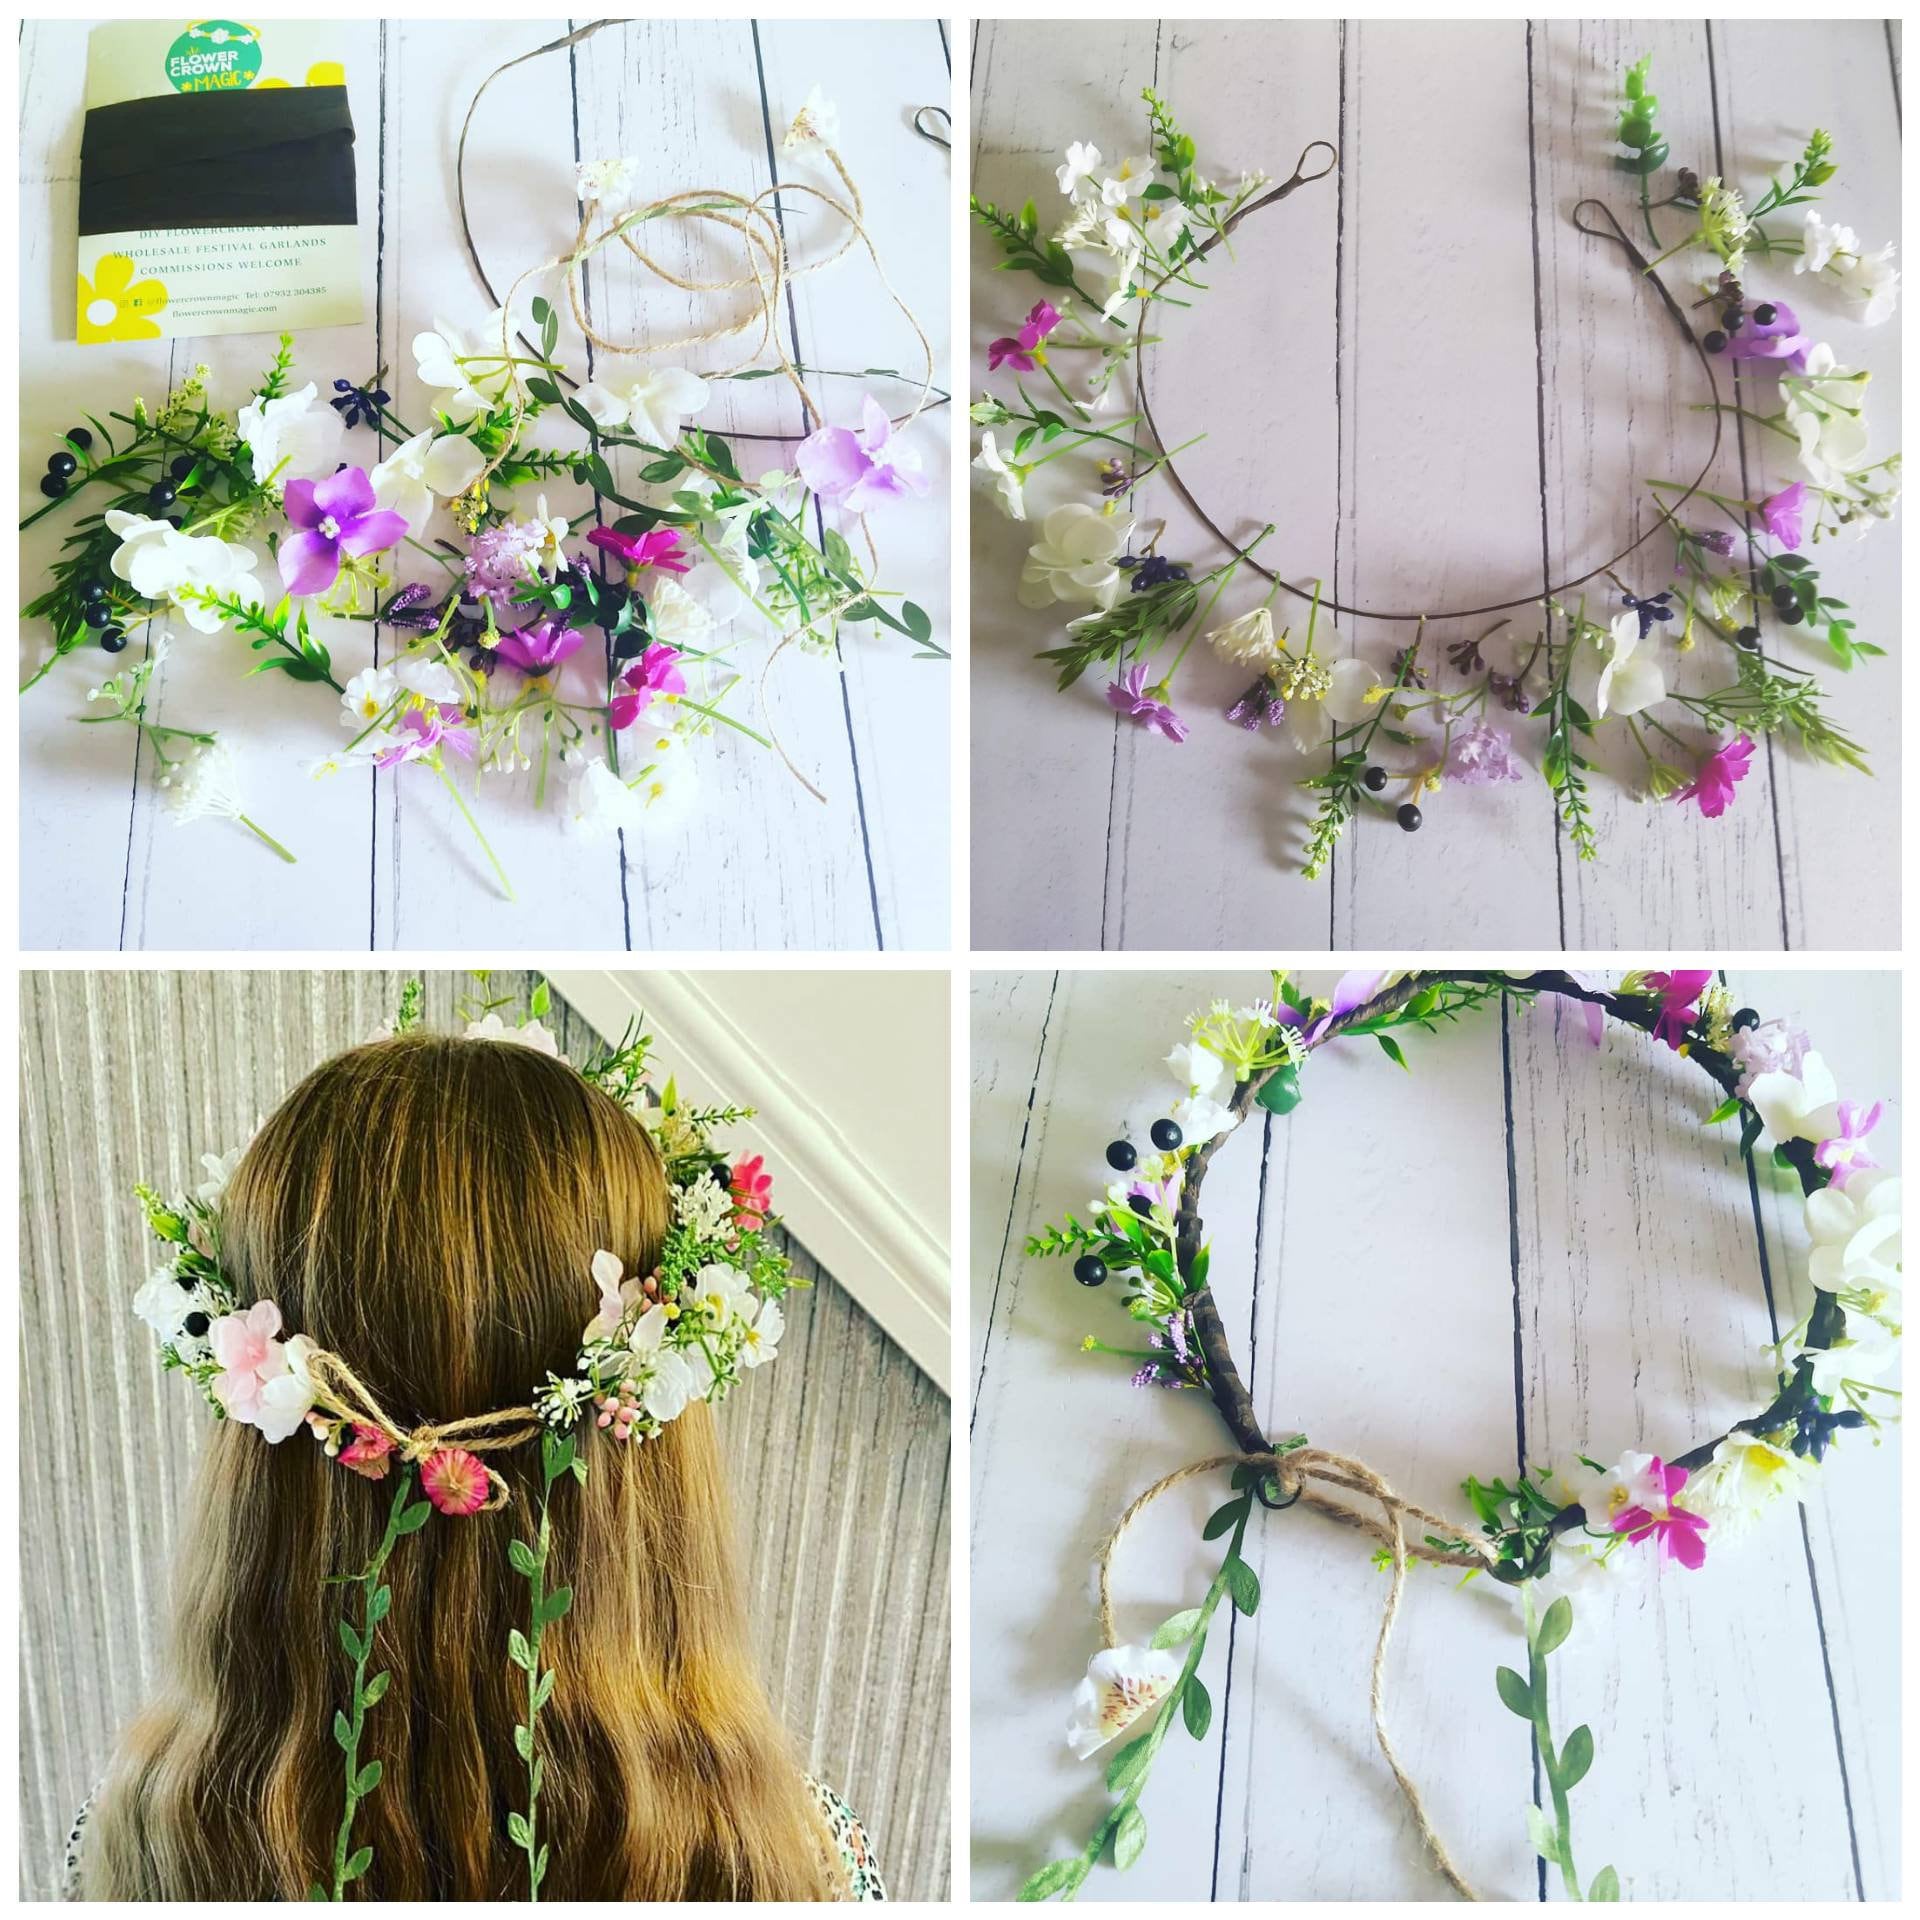 Looking for Classy Bachelorette Party Gifts: the Flower Crown Kit for the  DIY Bride